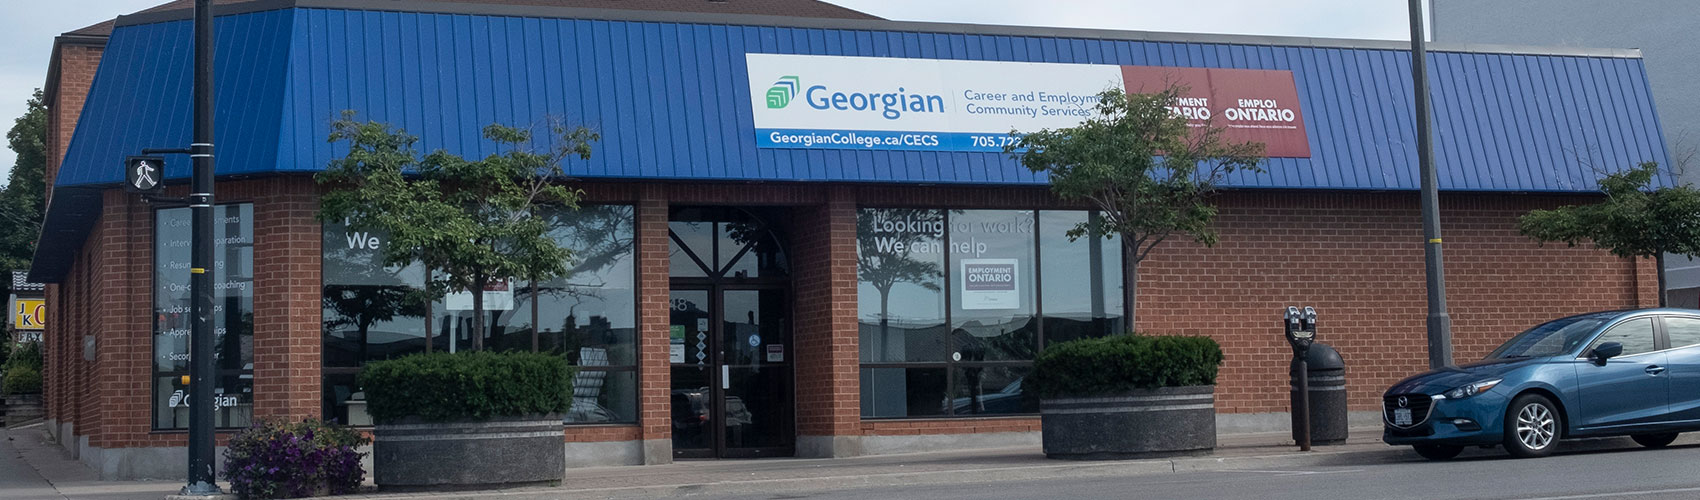 Exterior of Georgian's Career and Employment Community Services building, located on Collier St. in Barrie